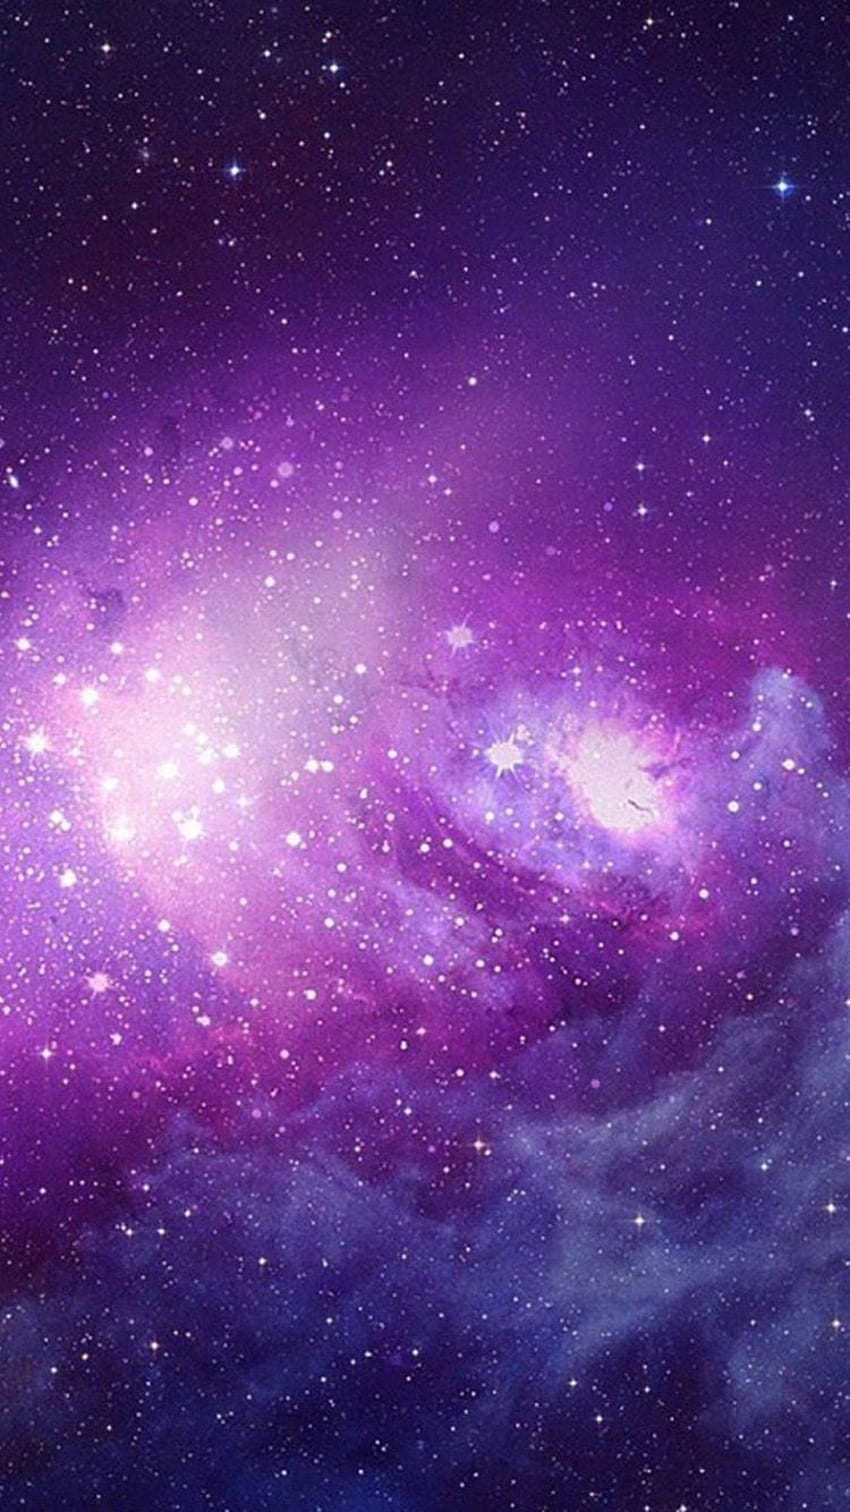 IPhone . Sky, Purple, Violet, Outer space, Atmosphere, Purple Galaxy ...